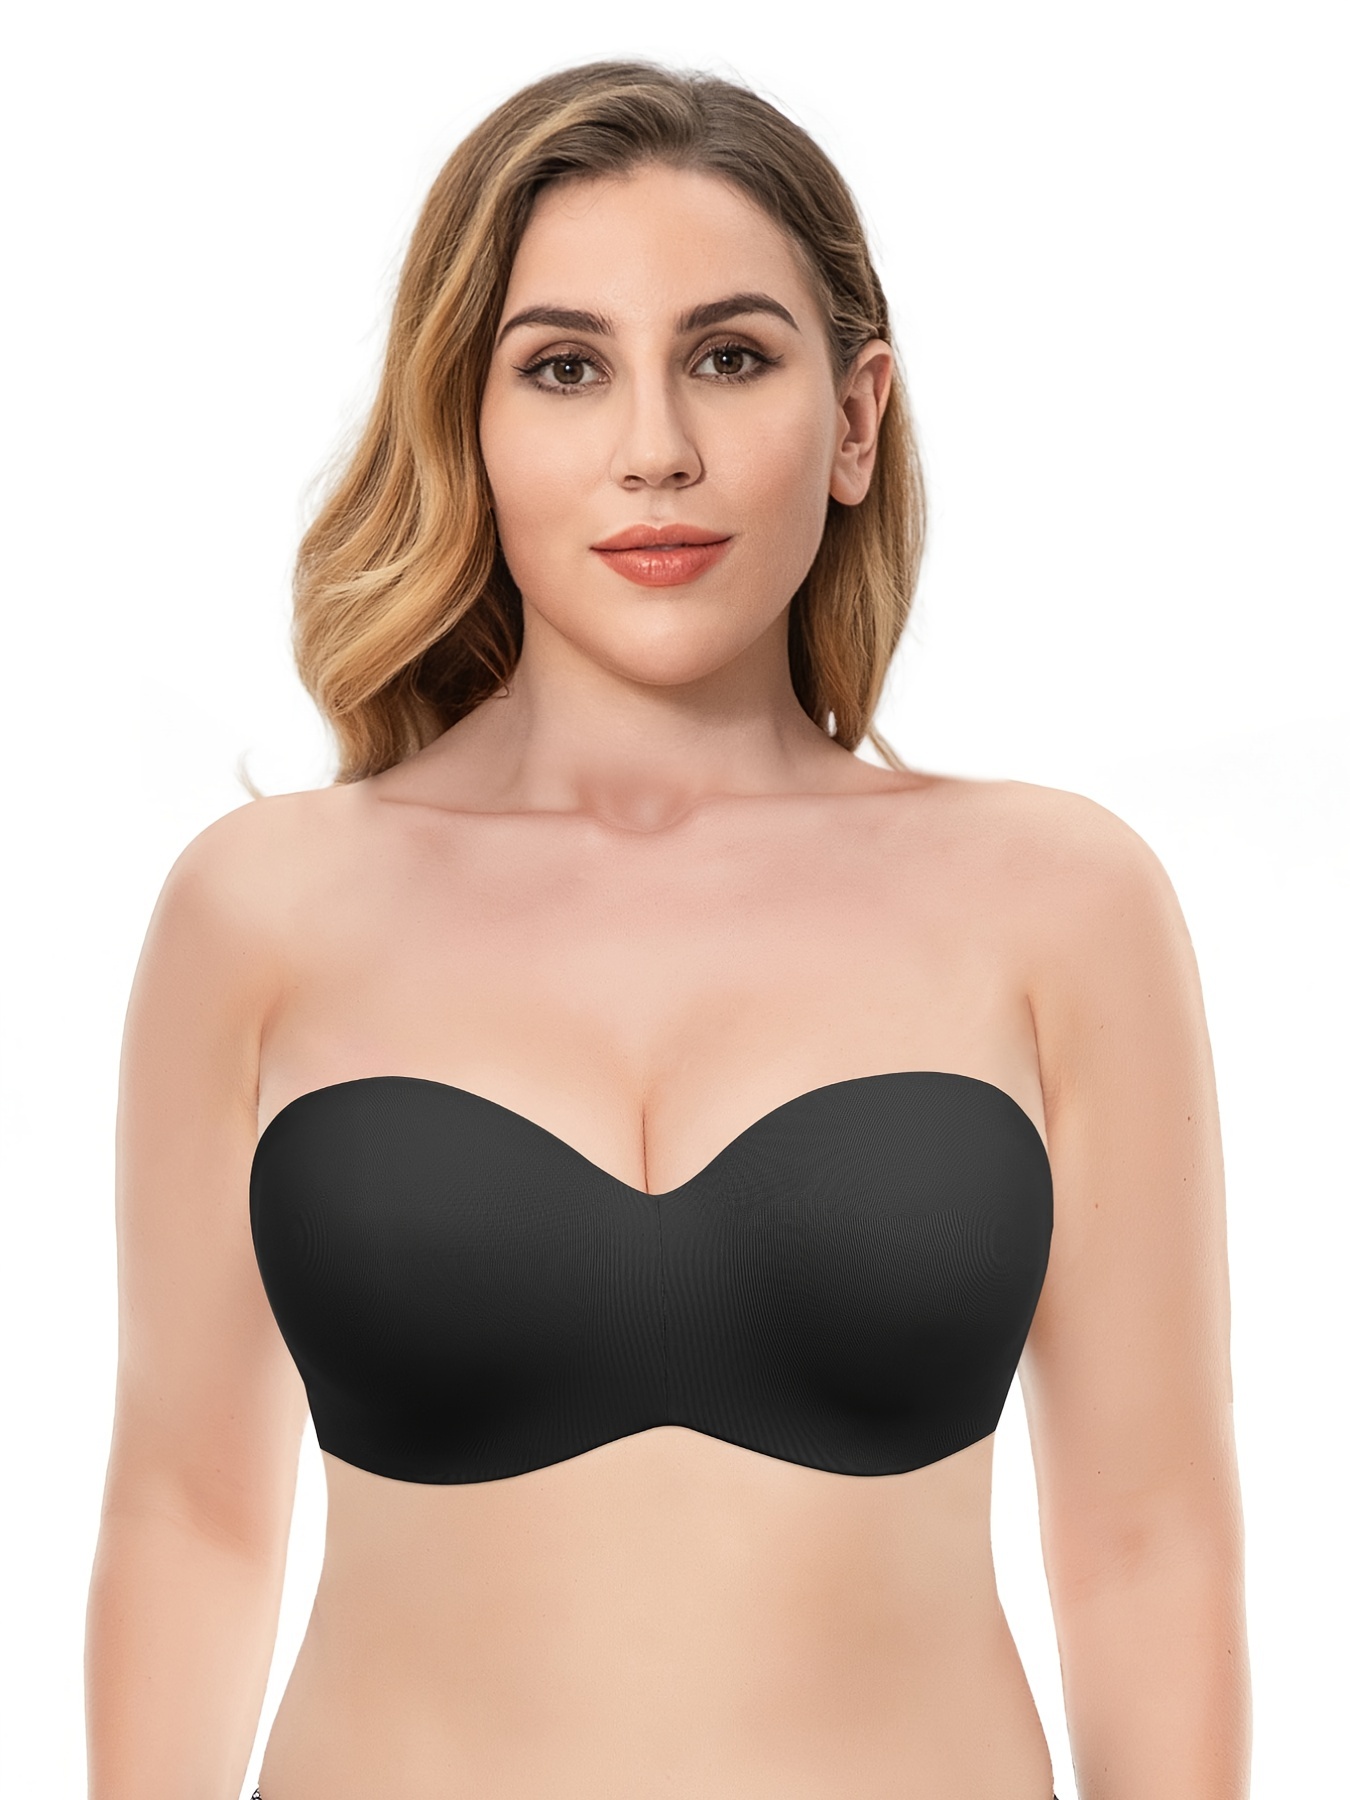 Qcmgmg Strapless Bandeau Bra Bandeau Tube Push Up Bras for Women No  Underwire V Neck Padded Bras for Women Plus Size Complexion 46D 